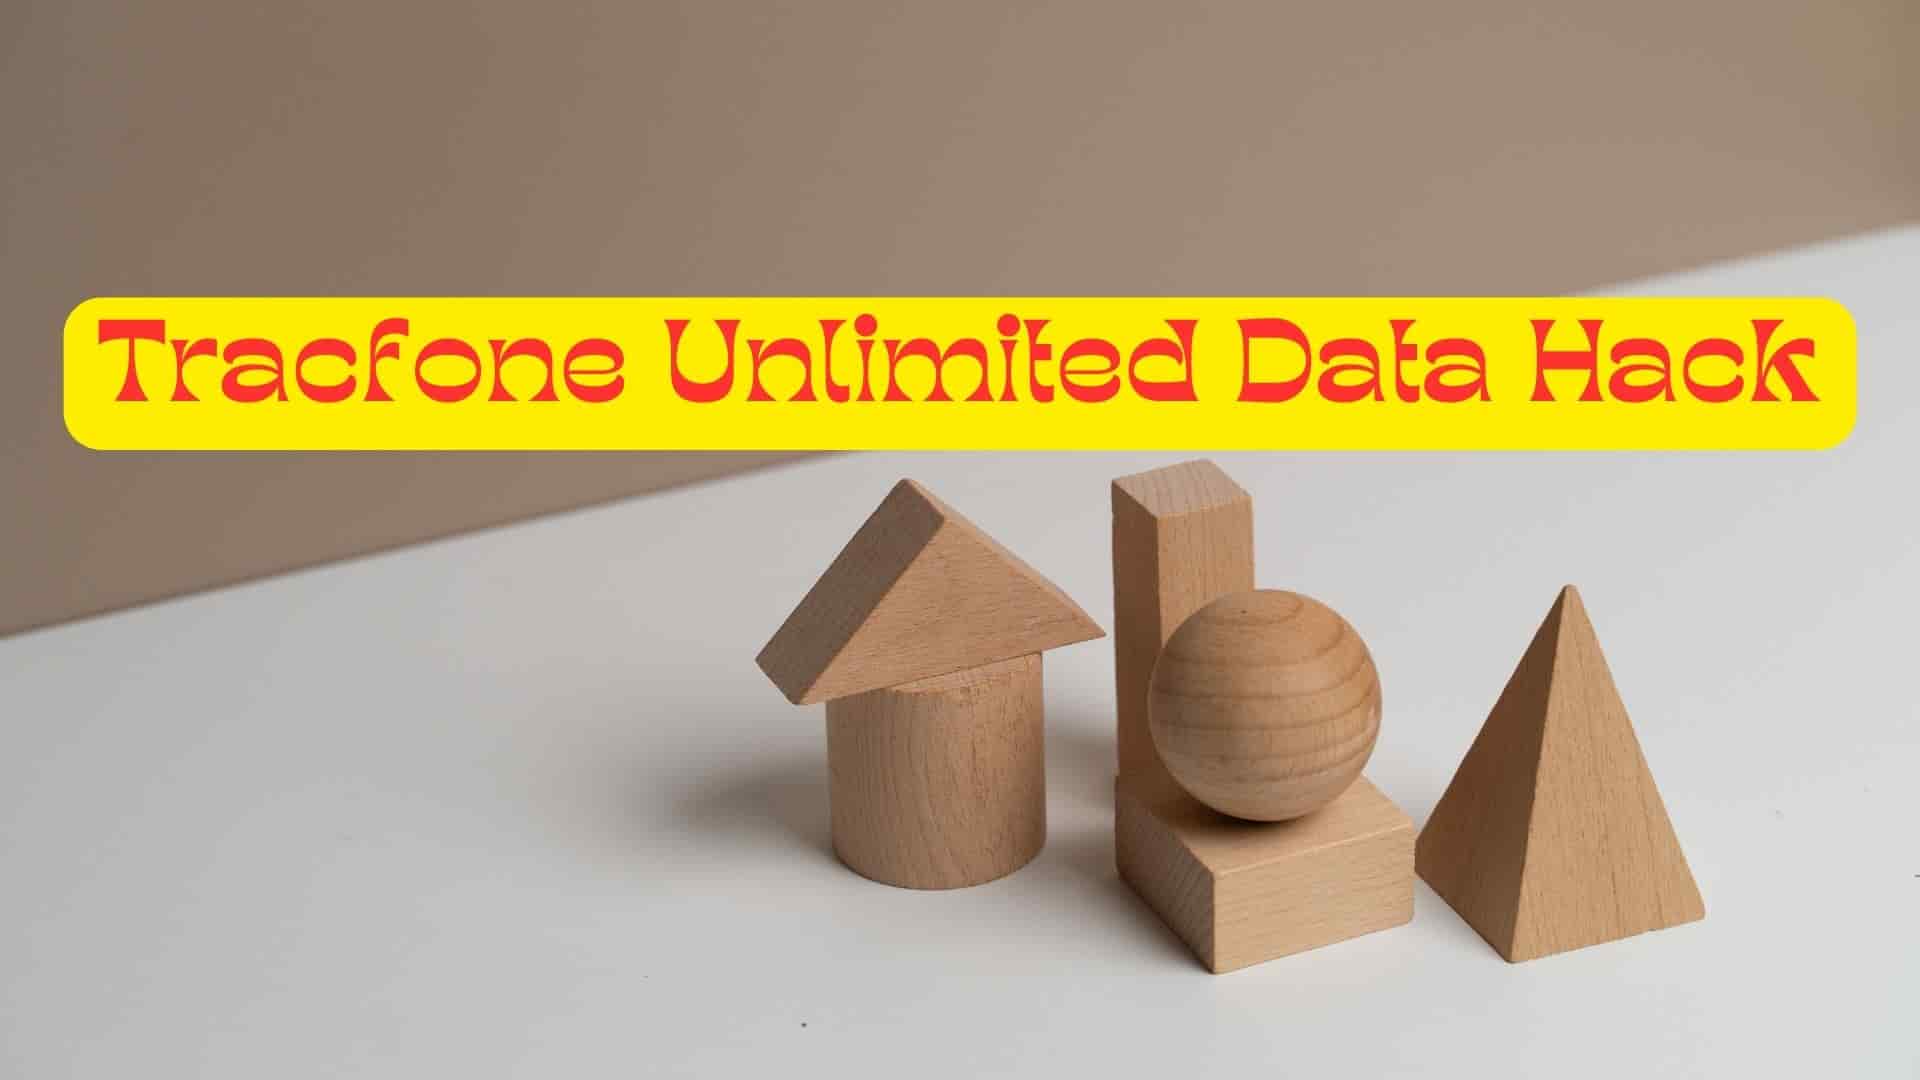 Tracfone Unlimited Data Hack - Free Tracfone Data Codes